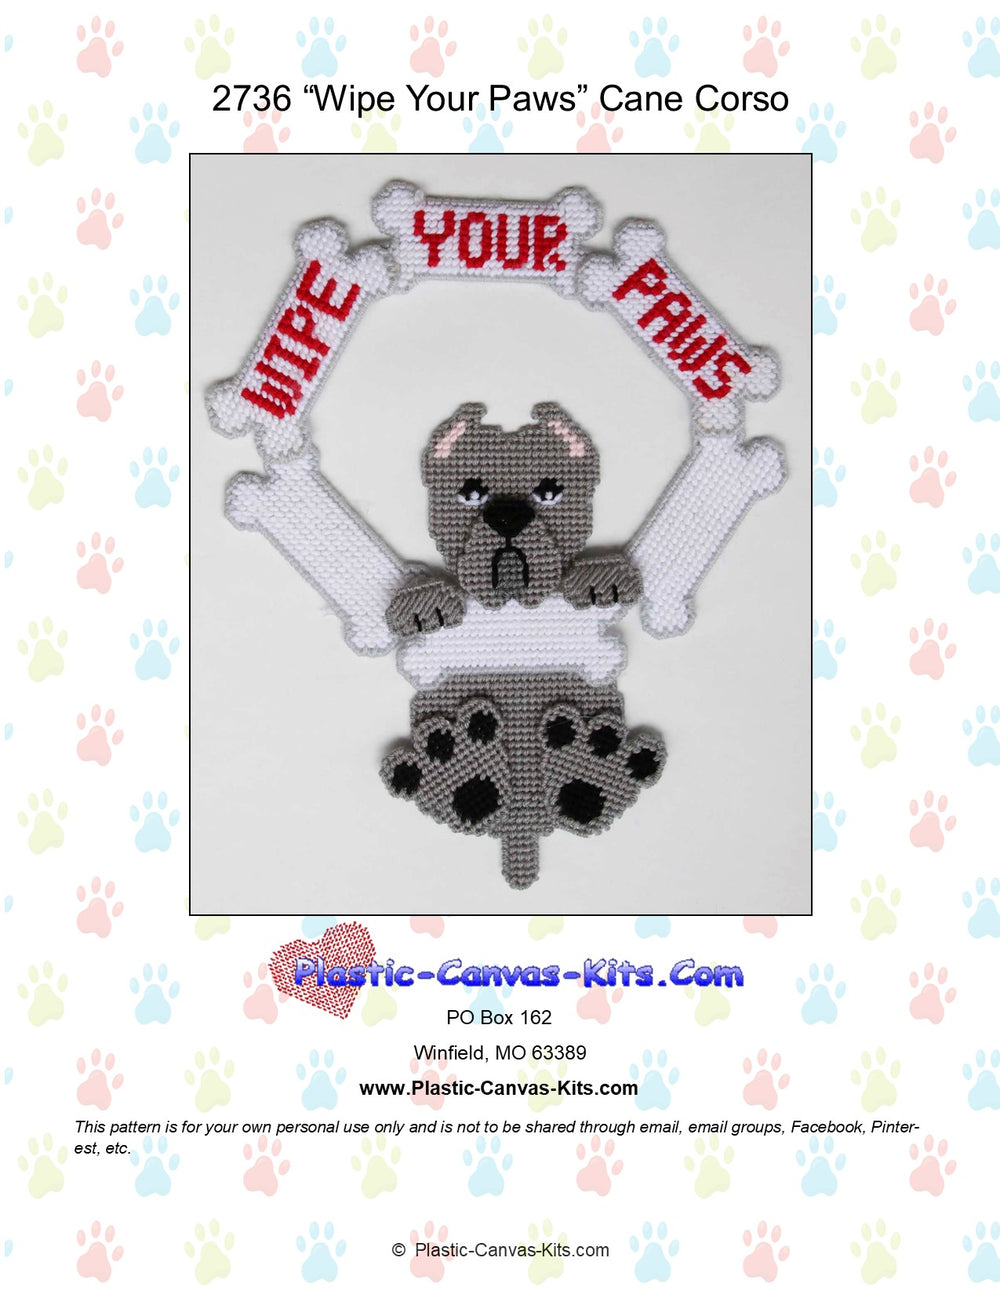 Cane Corso -Wipe Your Paws